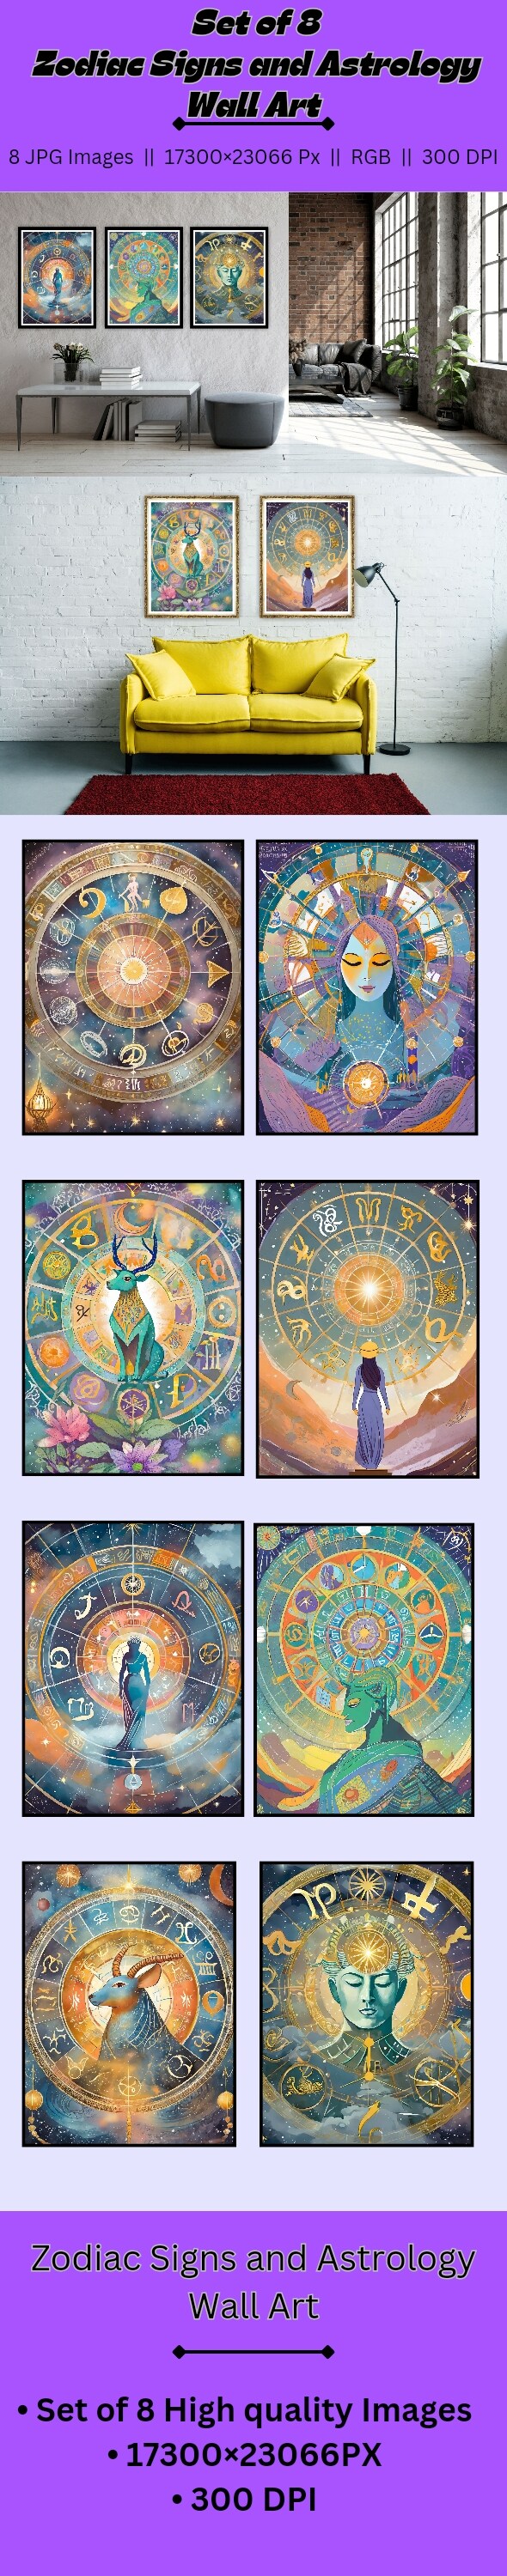 preview of zodiac signs and astr 769